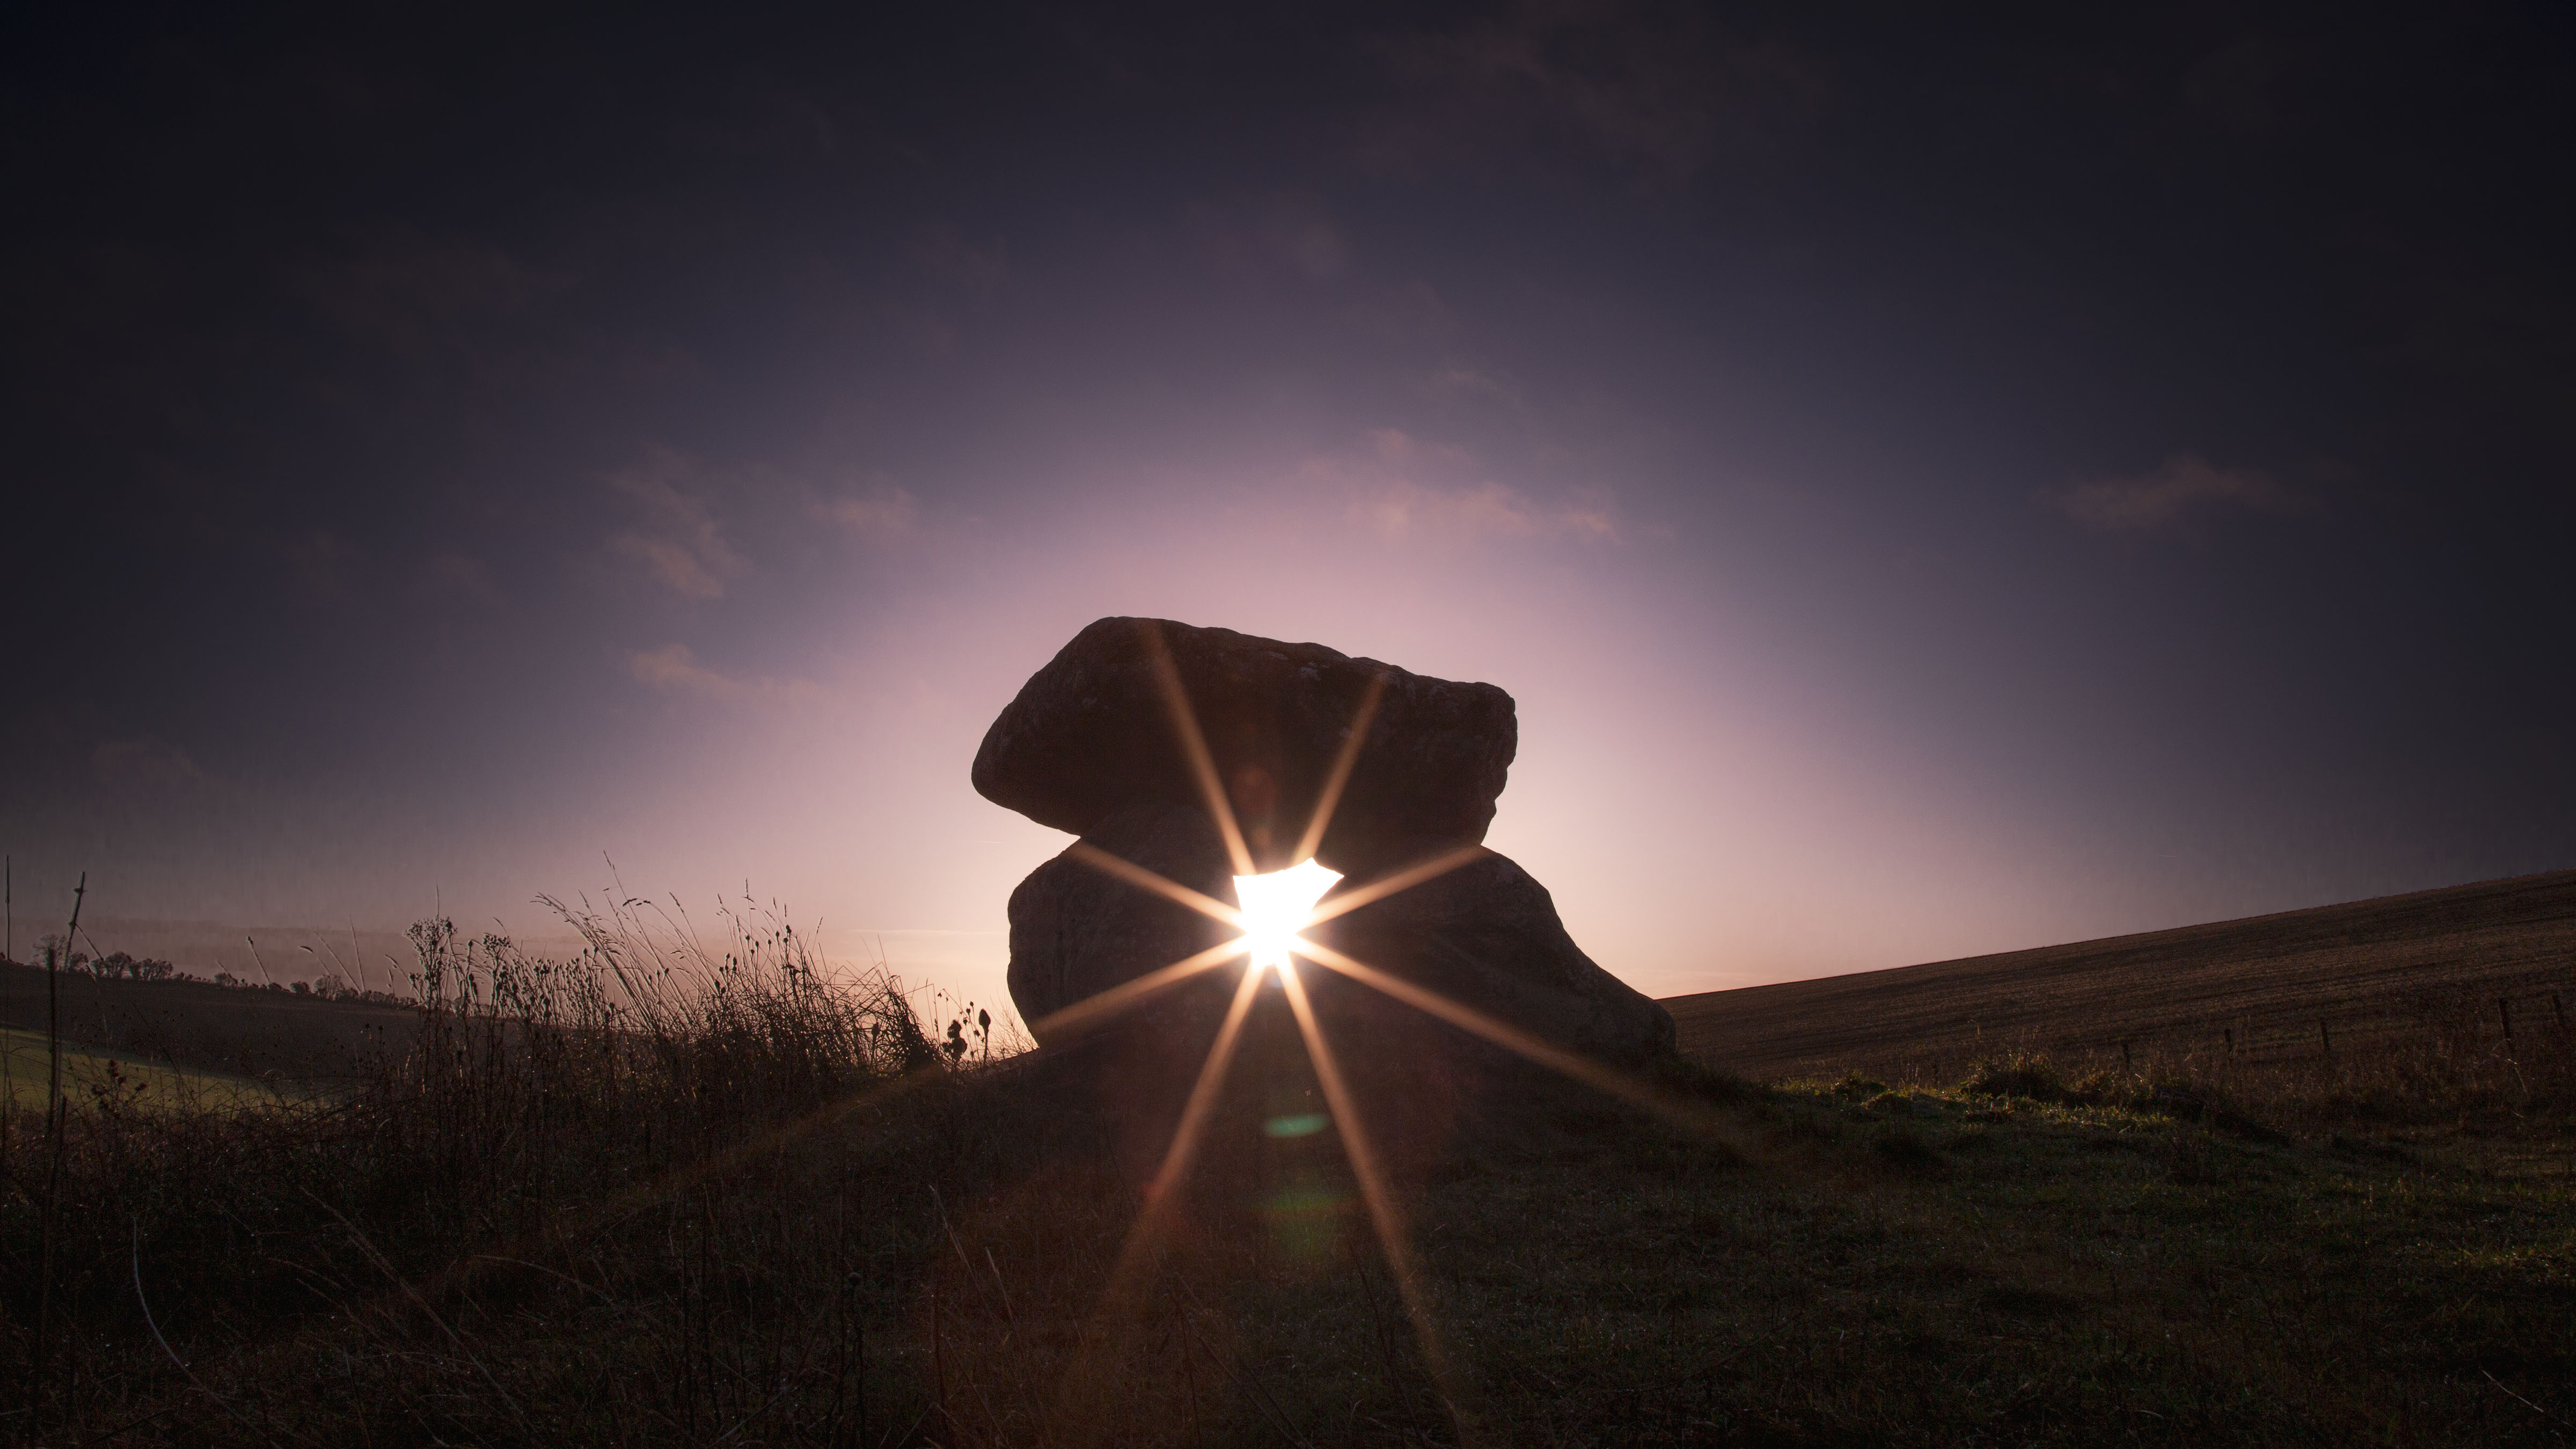 the sun rises in between a pillar of stones grass is visible on the left in shadow, backdropped against the sky, and a hill rises to the right